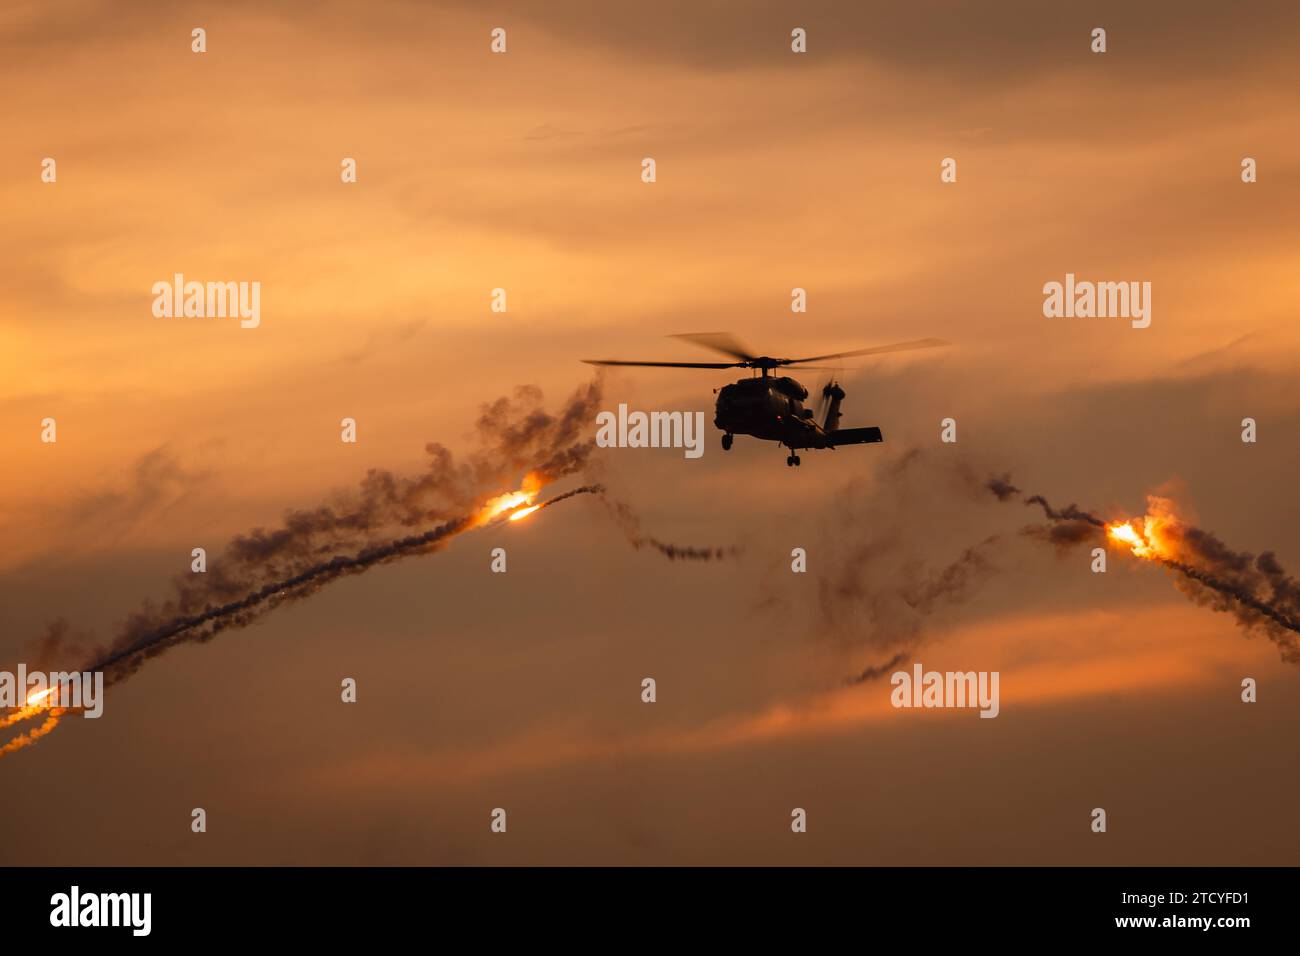 An MH-60R of Indian Navy releasing IRCM flares Stock Photo